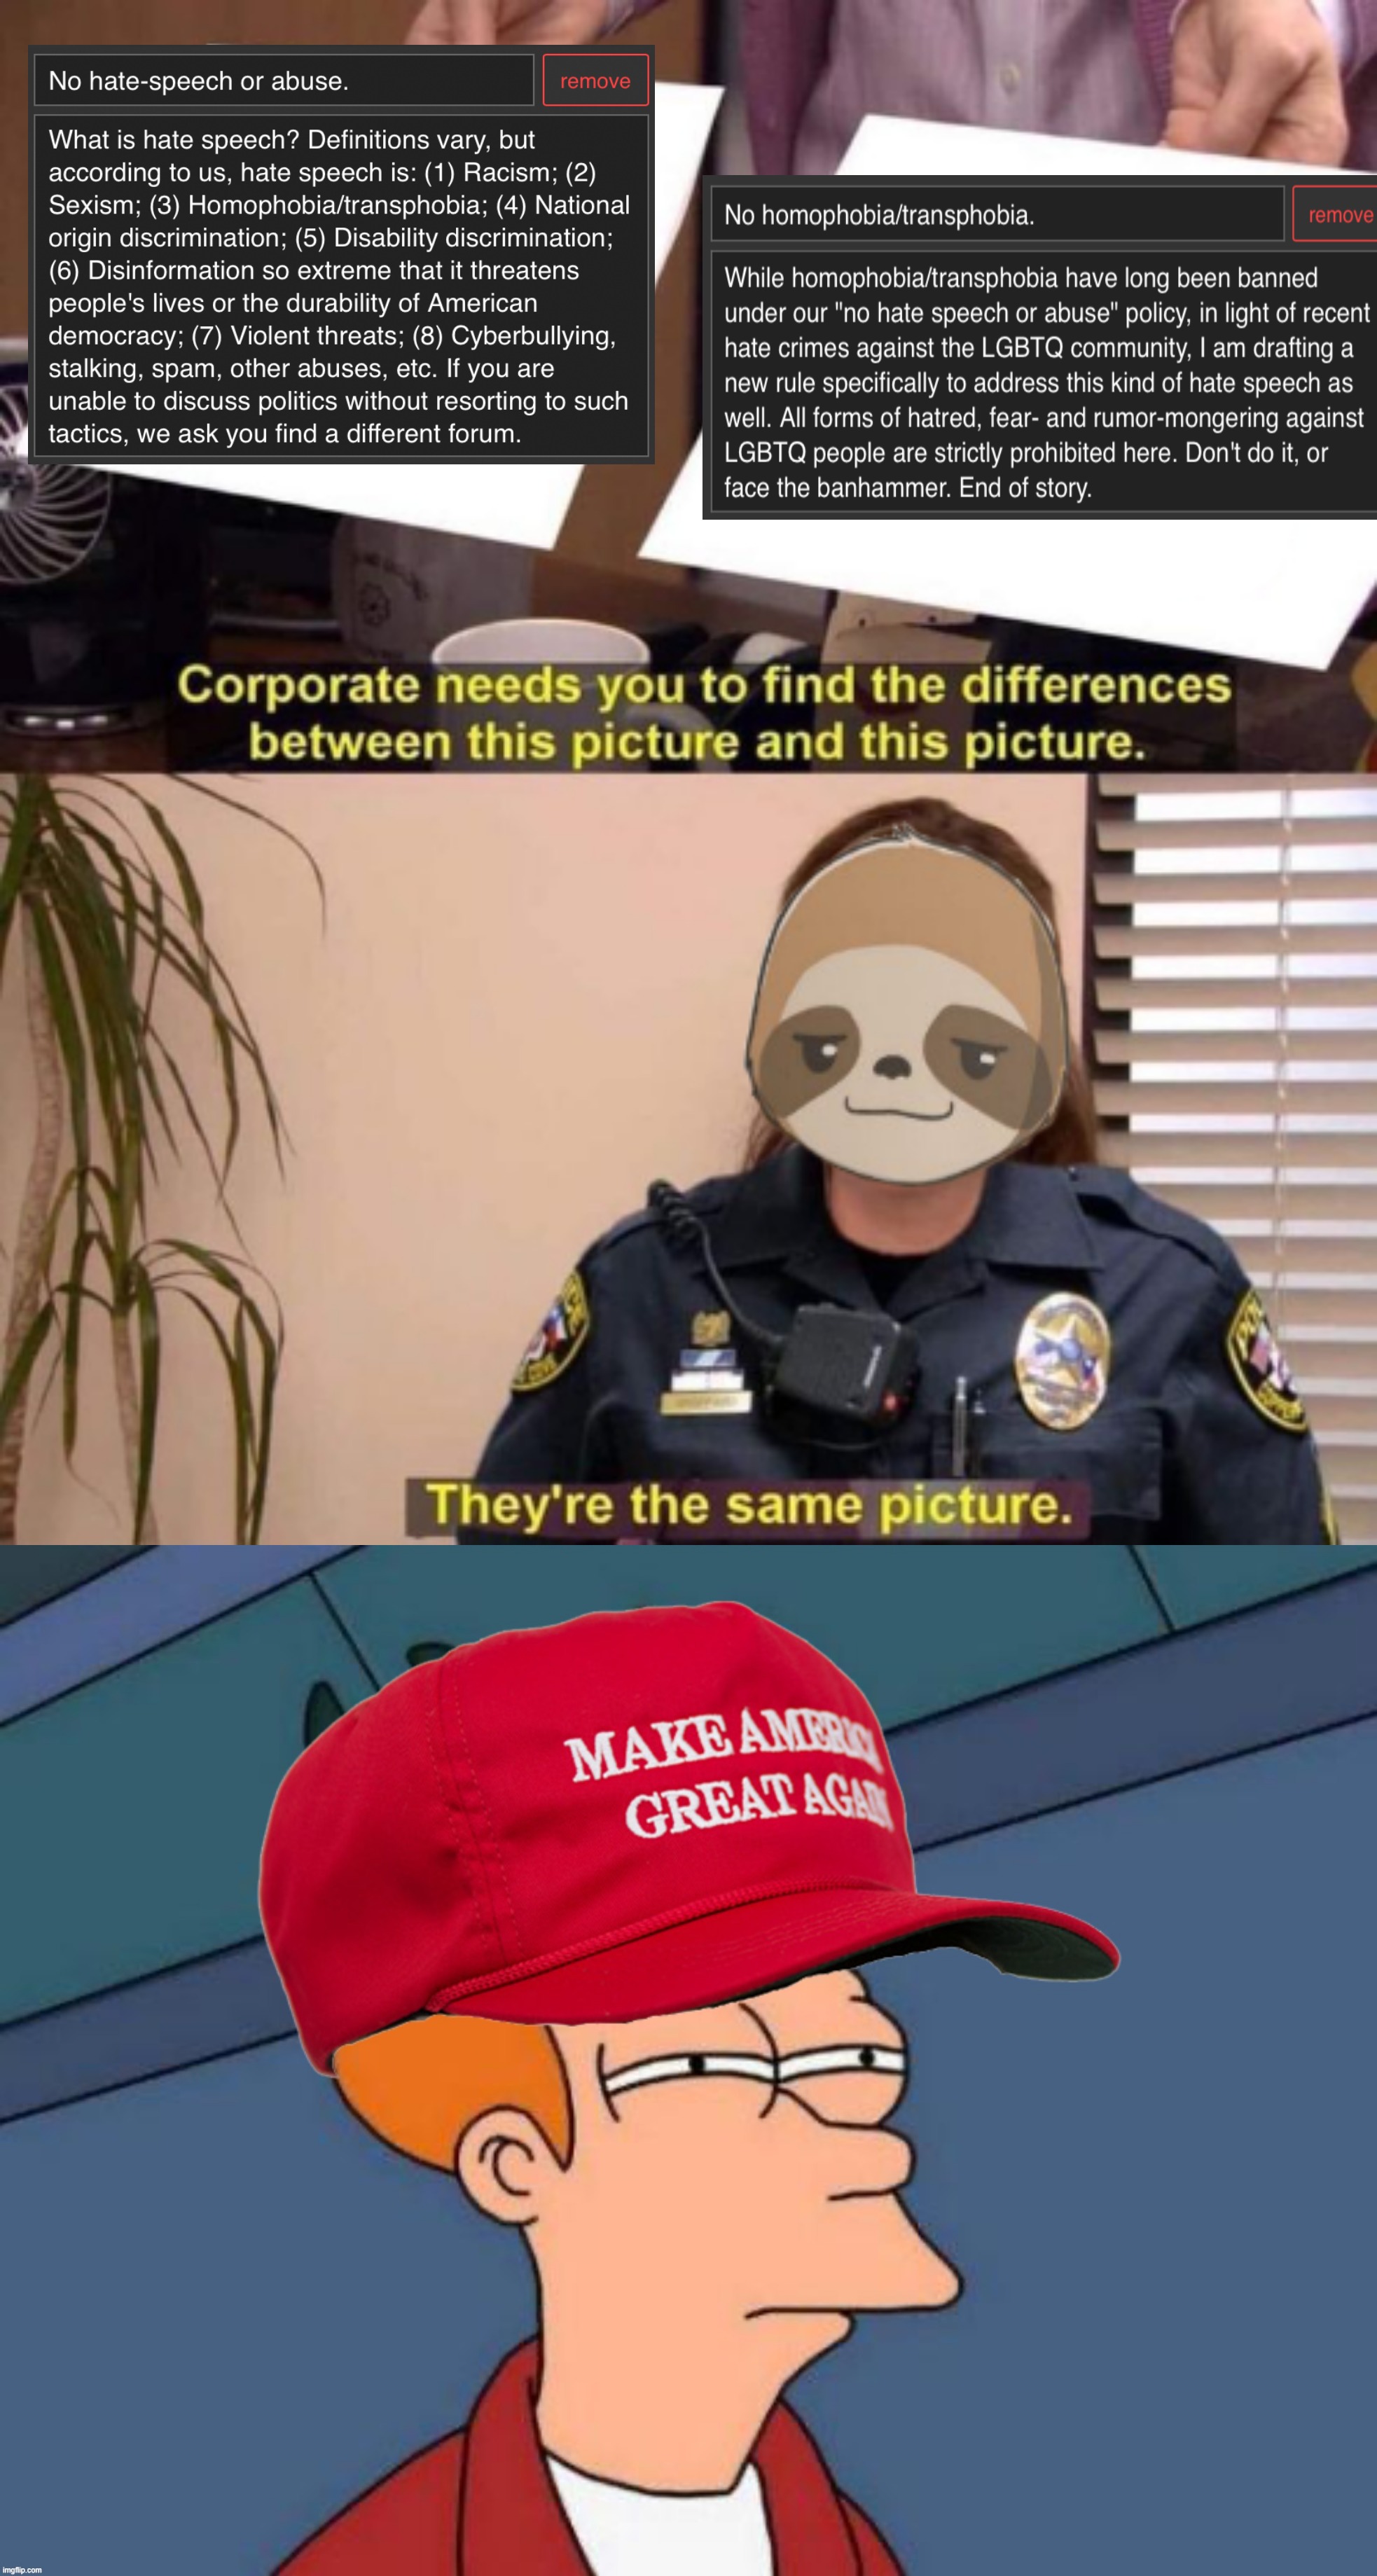 Not sure why those libtrad PoliticsTOO snowflakes are busy writing redundant rules that nobody reads anyway | image tagged in cop sloth they're the same picture,maga futurama fry,homophobia,transphobia,politicstoo,redundant rules | made w/ Imgflip meme maker